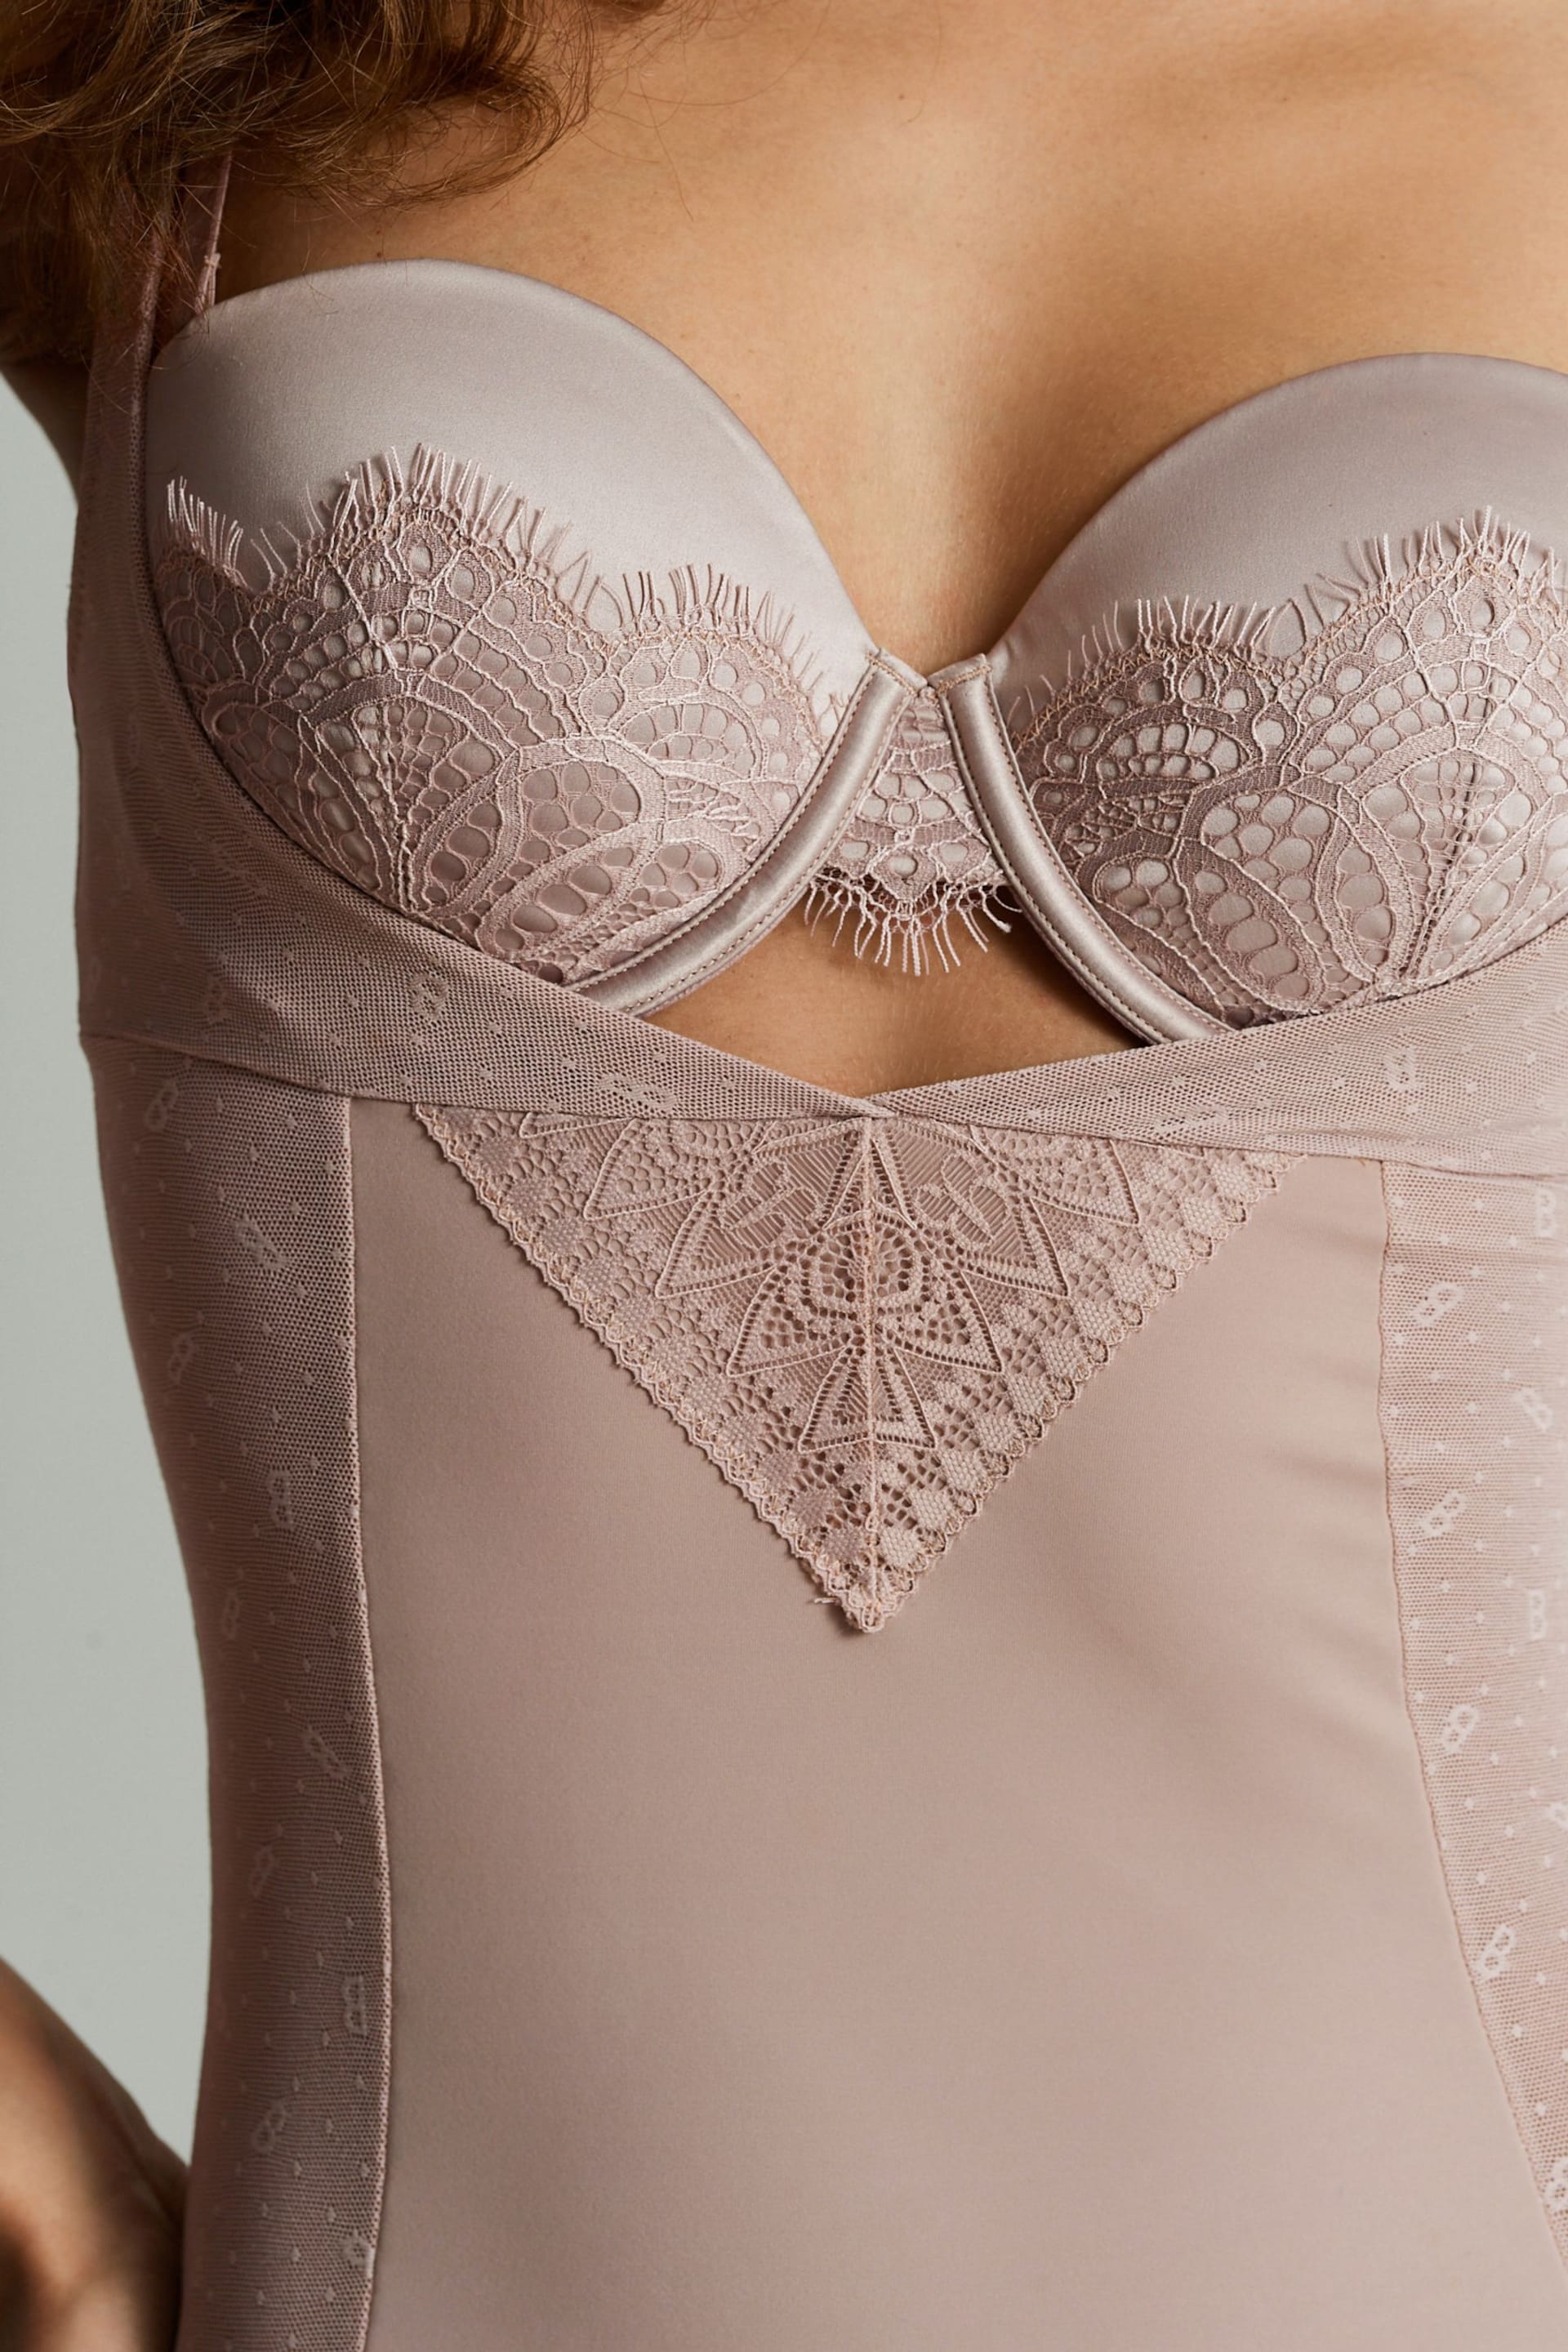 B by Ted Baker Wear Own Bra Shaping Slip - Image 3 of 7